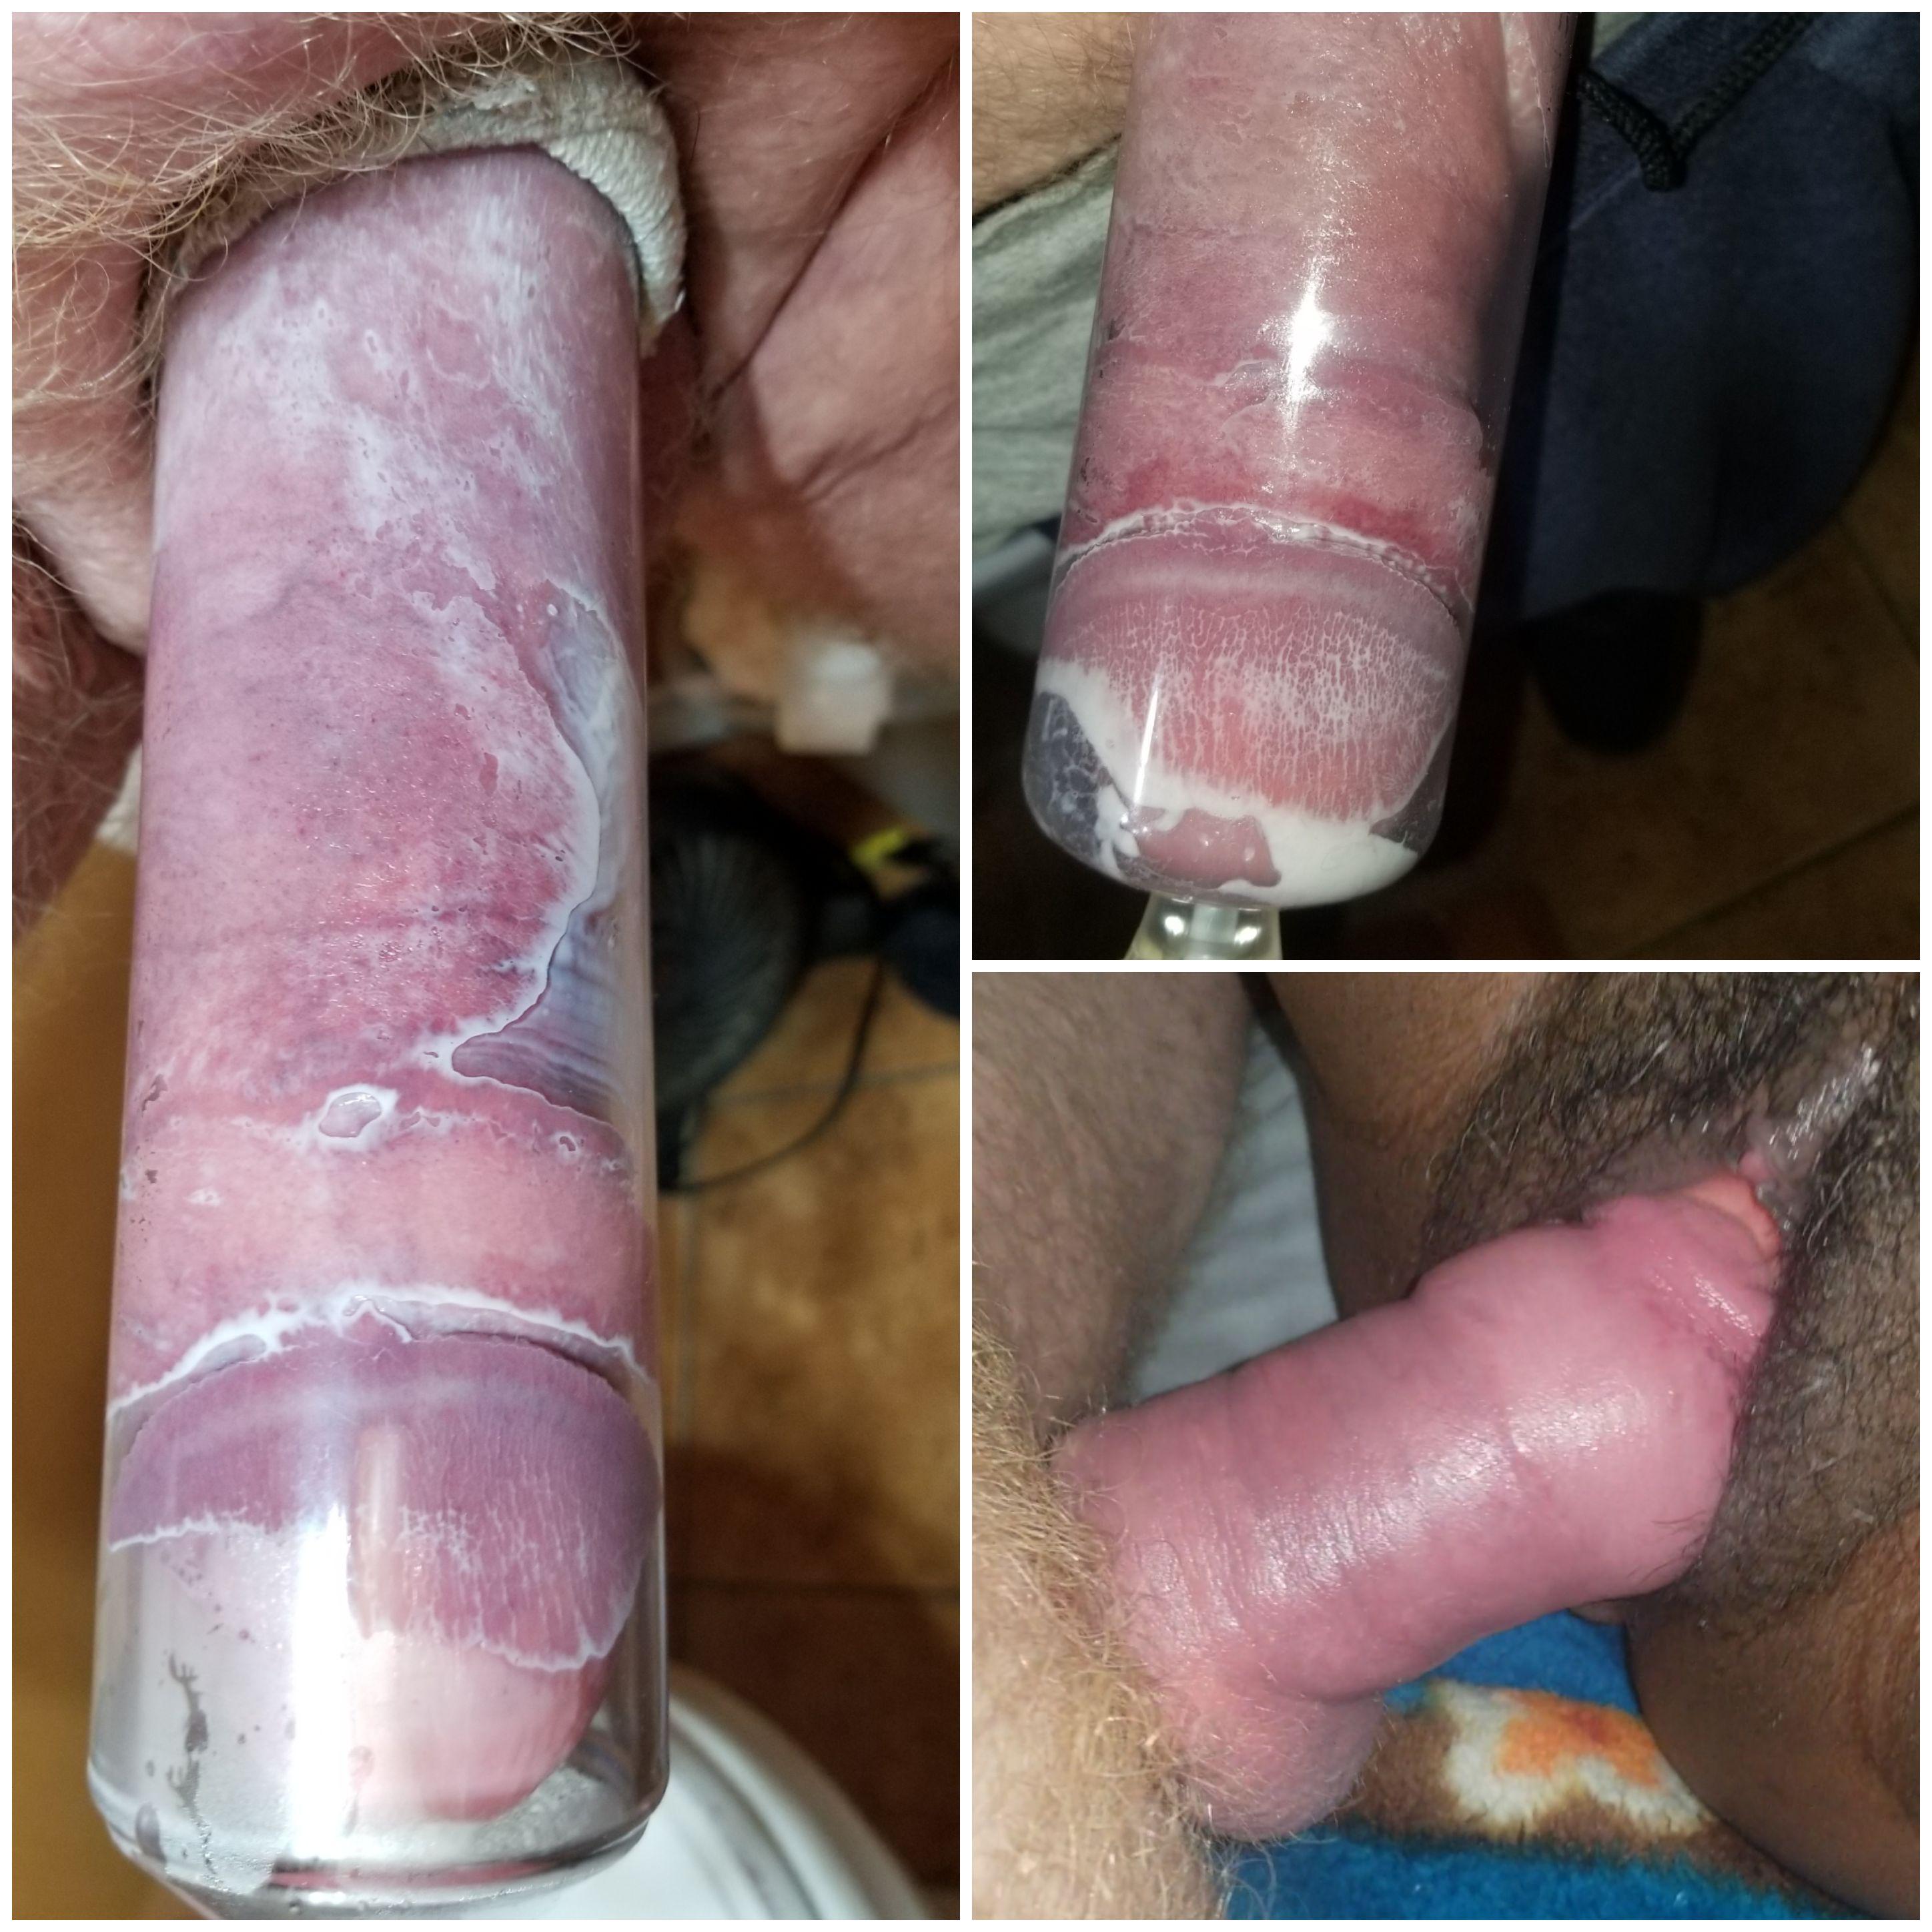 Pumping changed my life. When I packed the 8×2 it was exciting. The 9×2.5 amazing! I was a little over 5 inches erect before pumping. Now close to 9. The increase in thickness is what my Wife loves! The look on her face when she says 